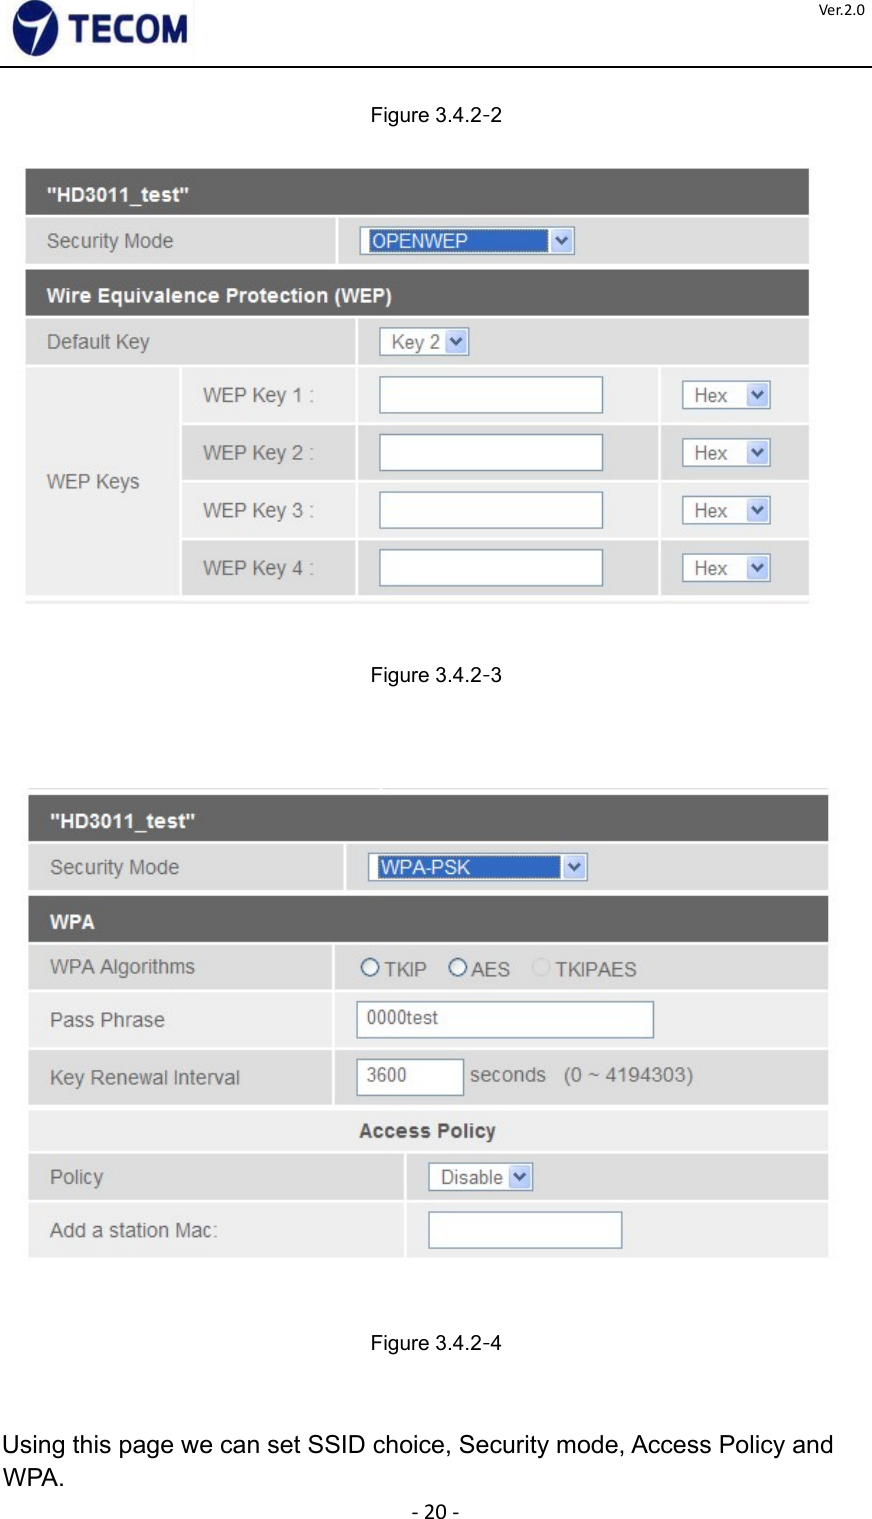  ‐20‐Ver.2.0Figure 3.4.2‐2          Figure 3.4.2‐3             Figure 3.4.2‐4       Using this page we can set SSID choice, Security mode, Access Policy and WPA.  